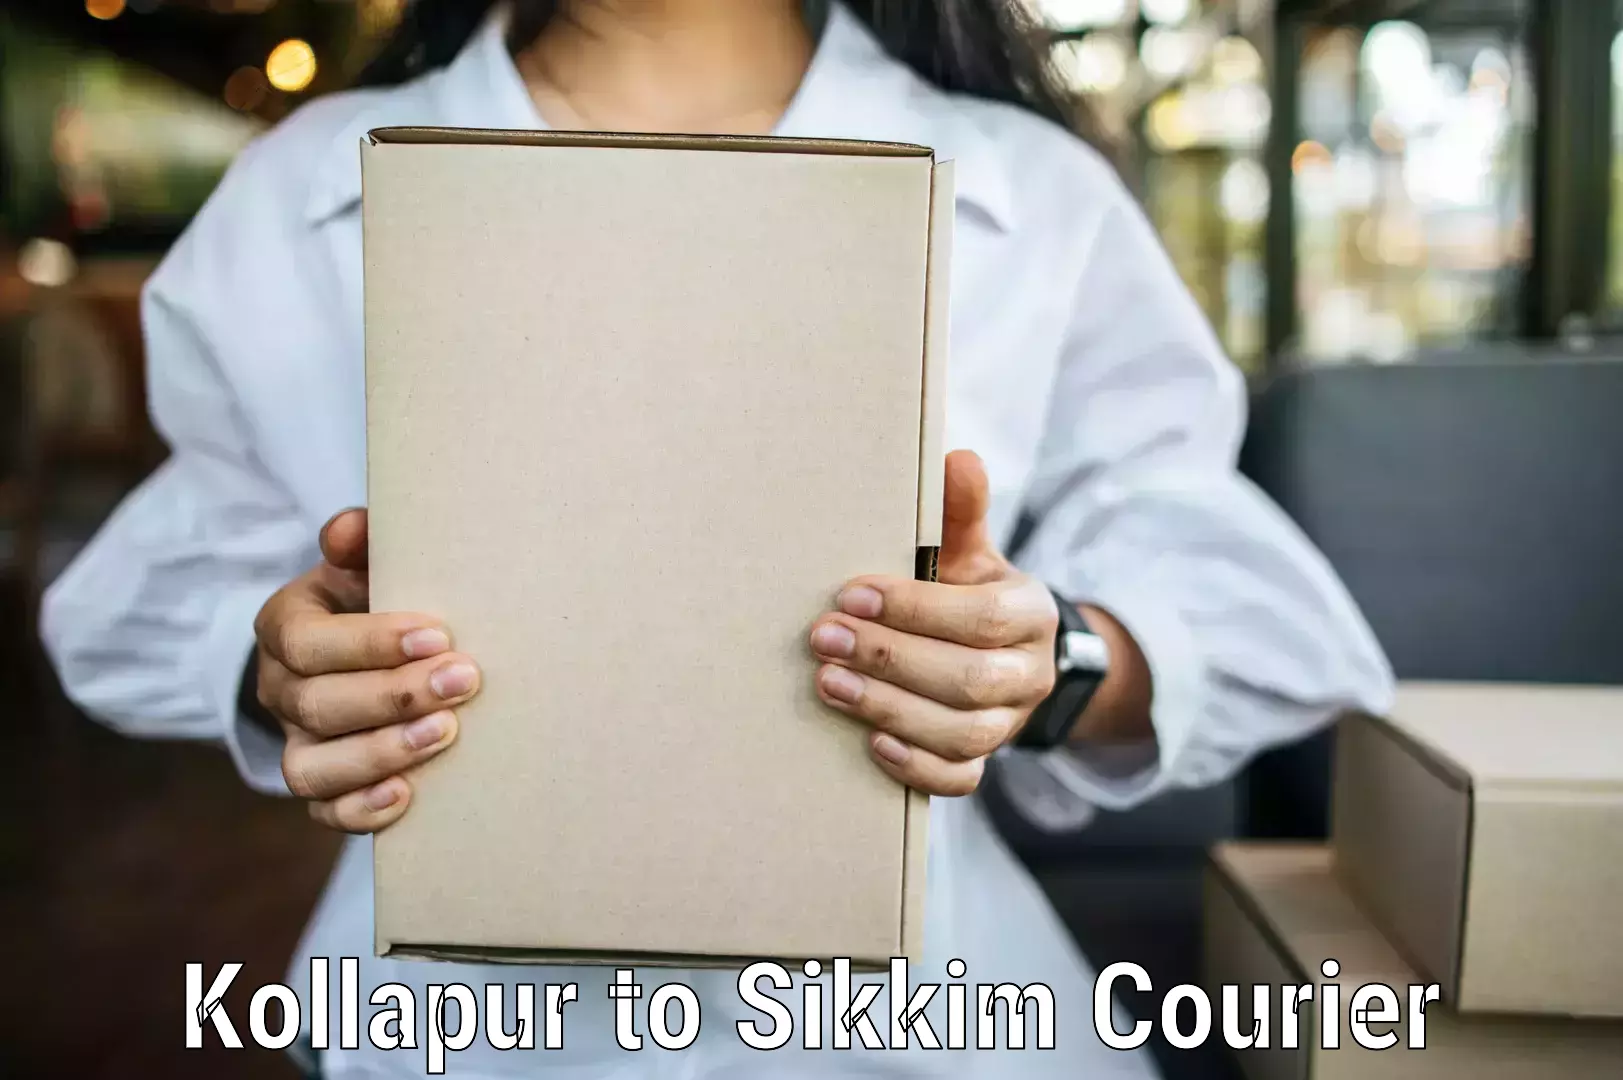 Full-service courier options Kollapur to Sikkim